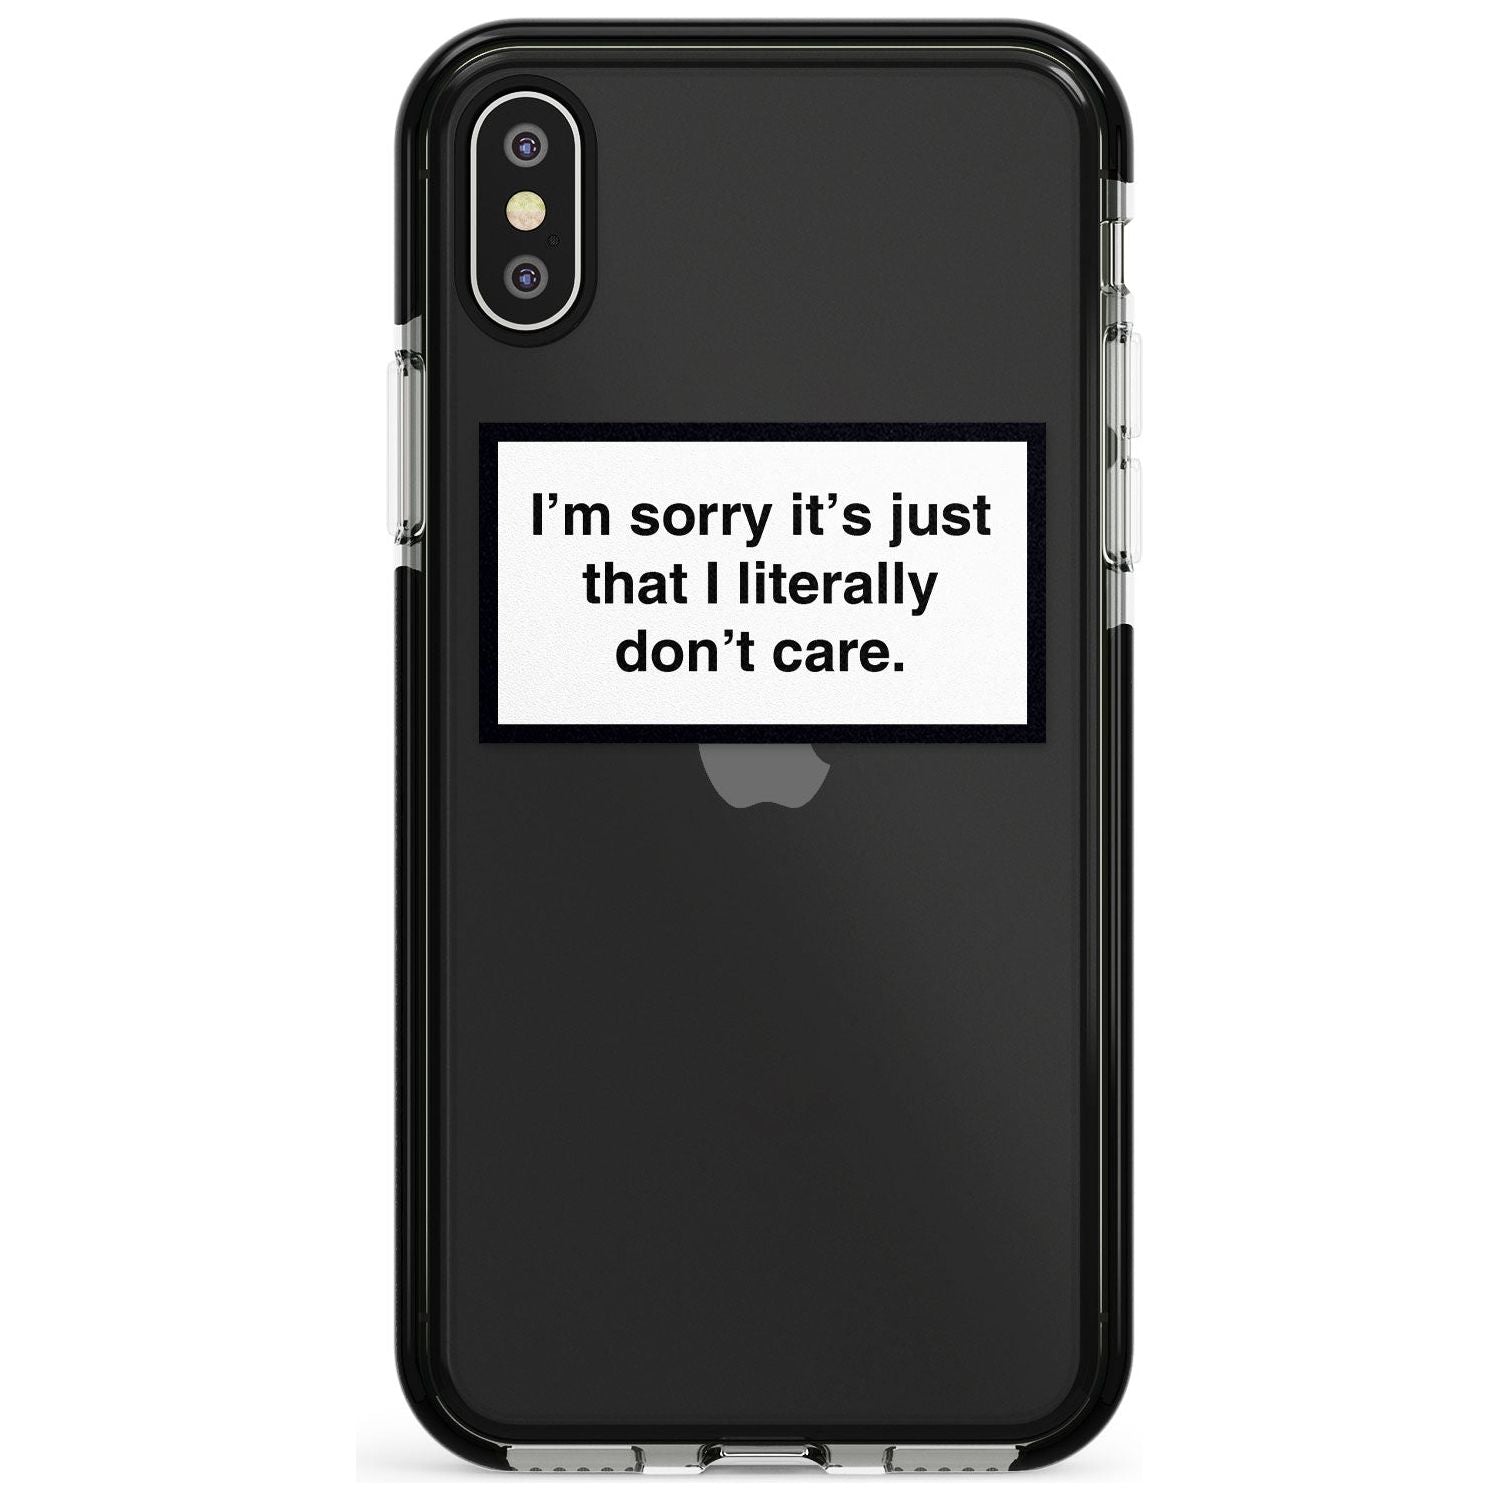 I'm sorry it's just that I literally don't care Pink Fade Impact Phone Case for iPhone X XS Max XR